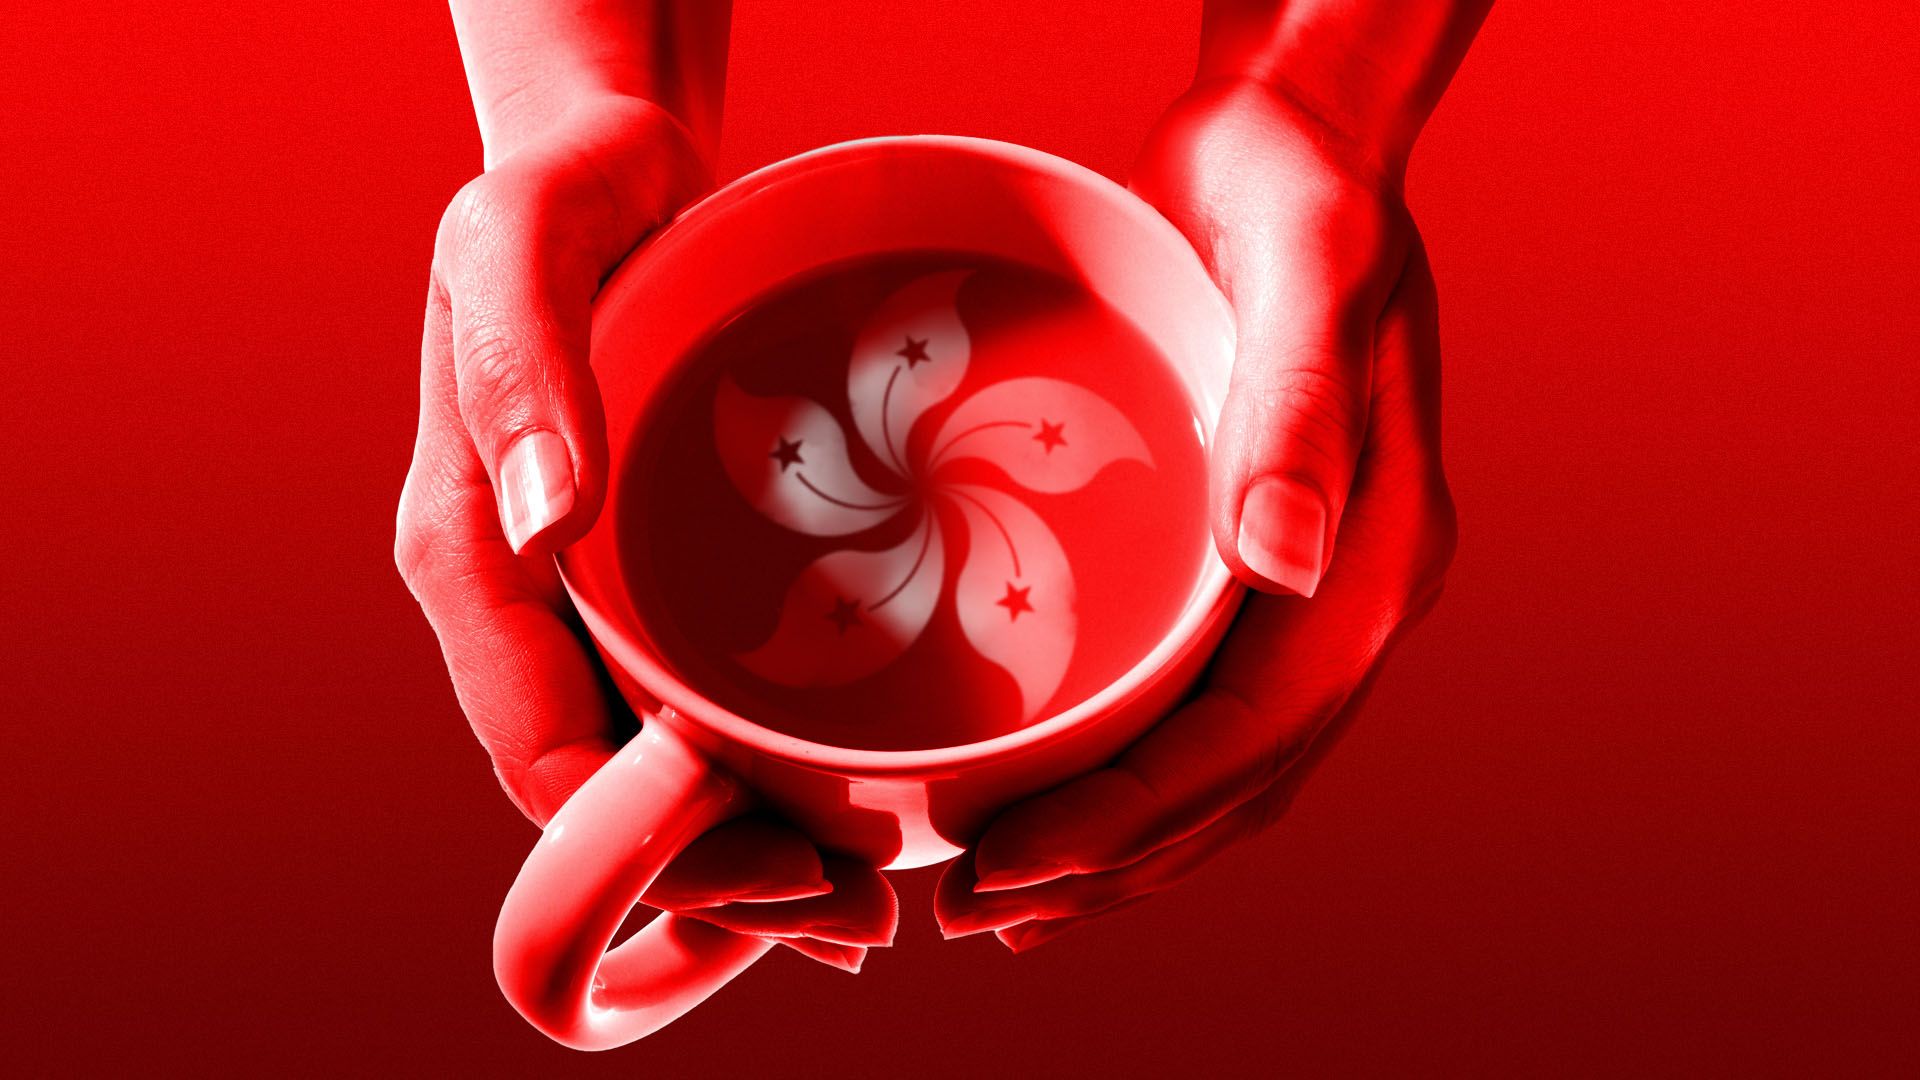 Illustration of hands grasped around a cup of milk tea with the Hong Kong flag within